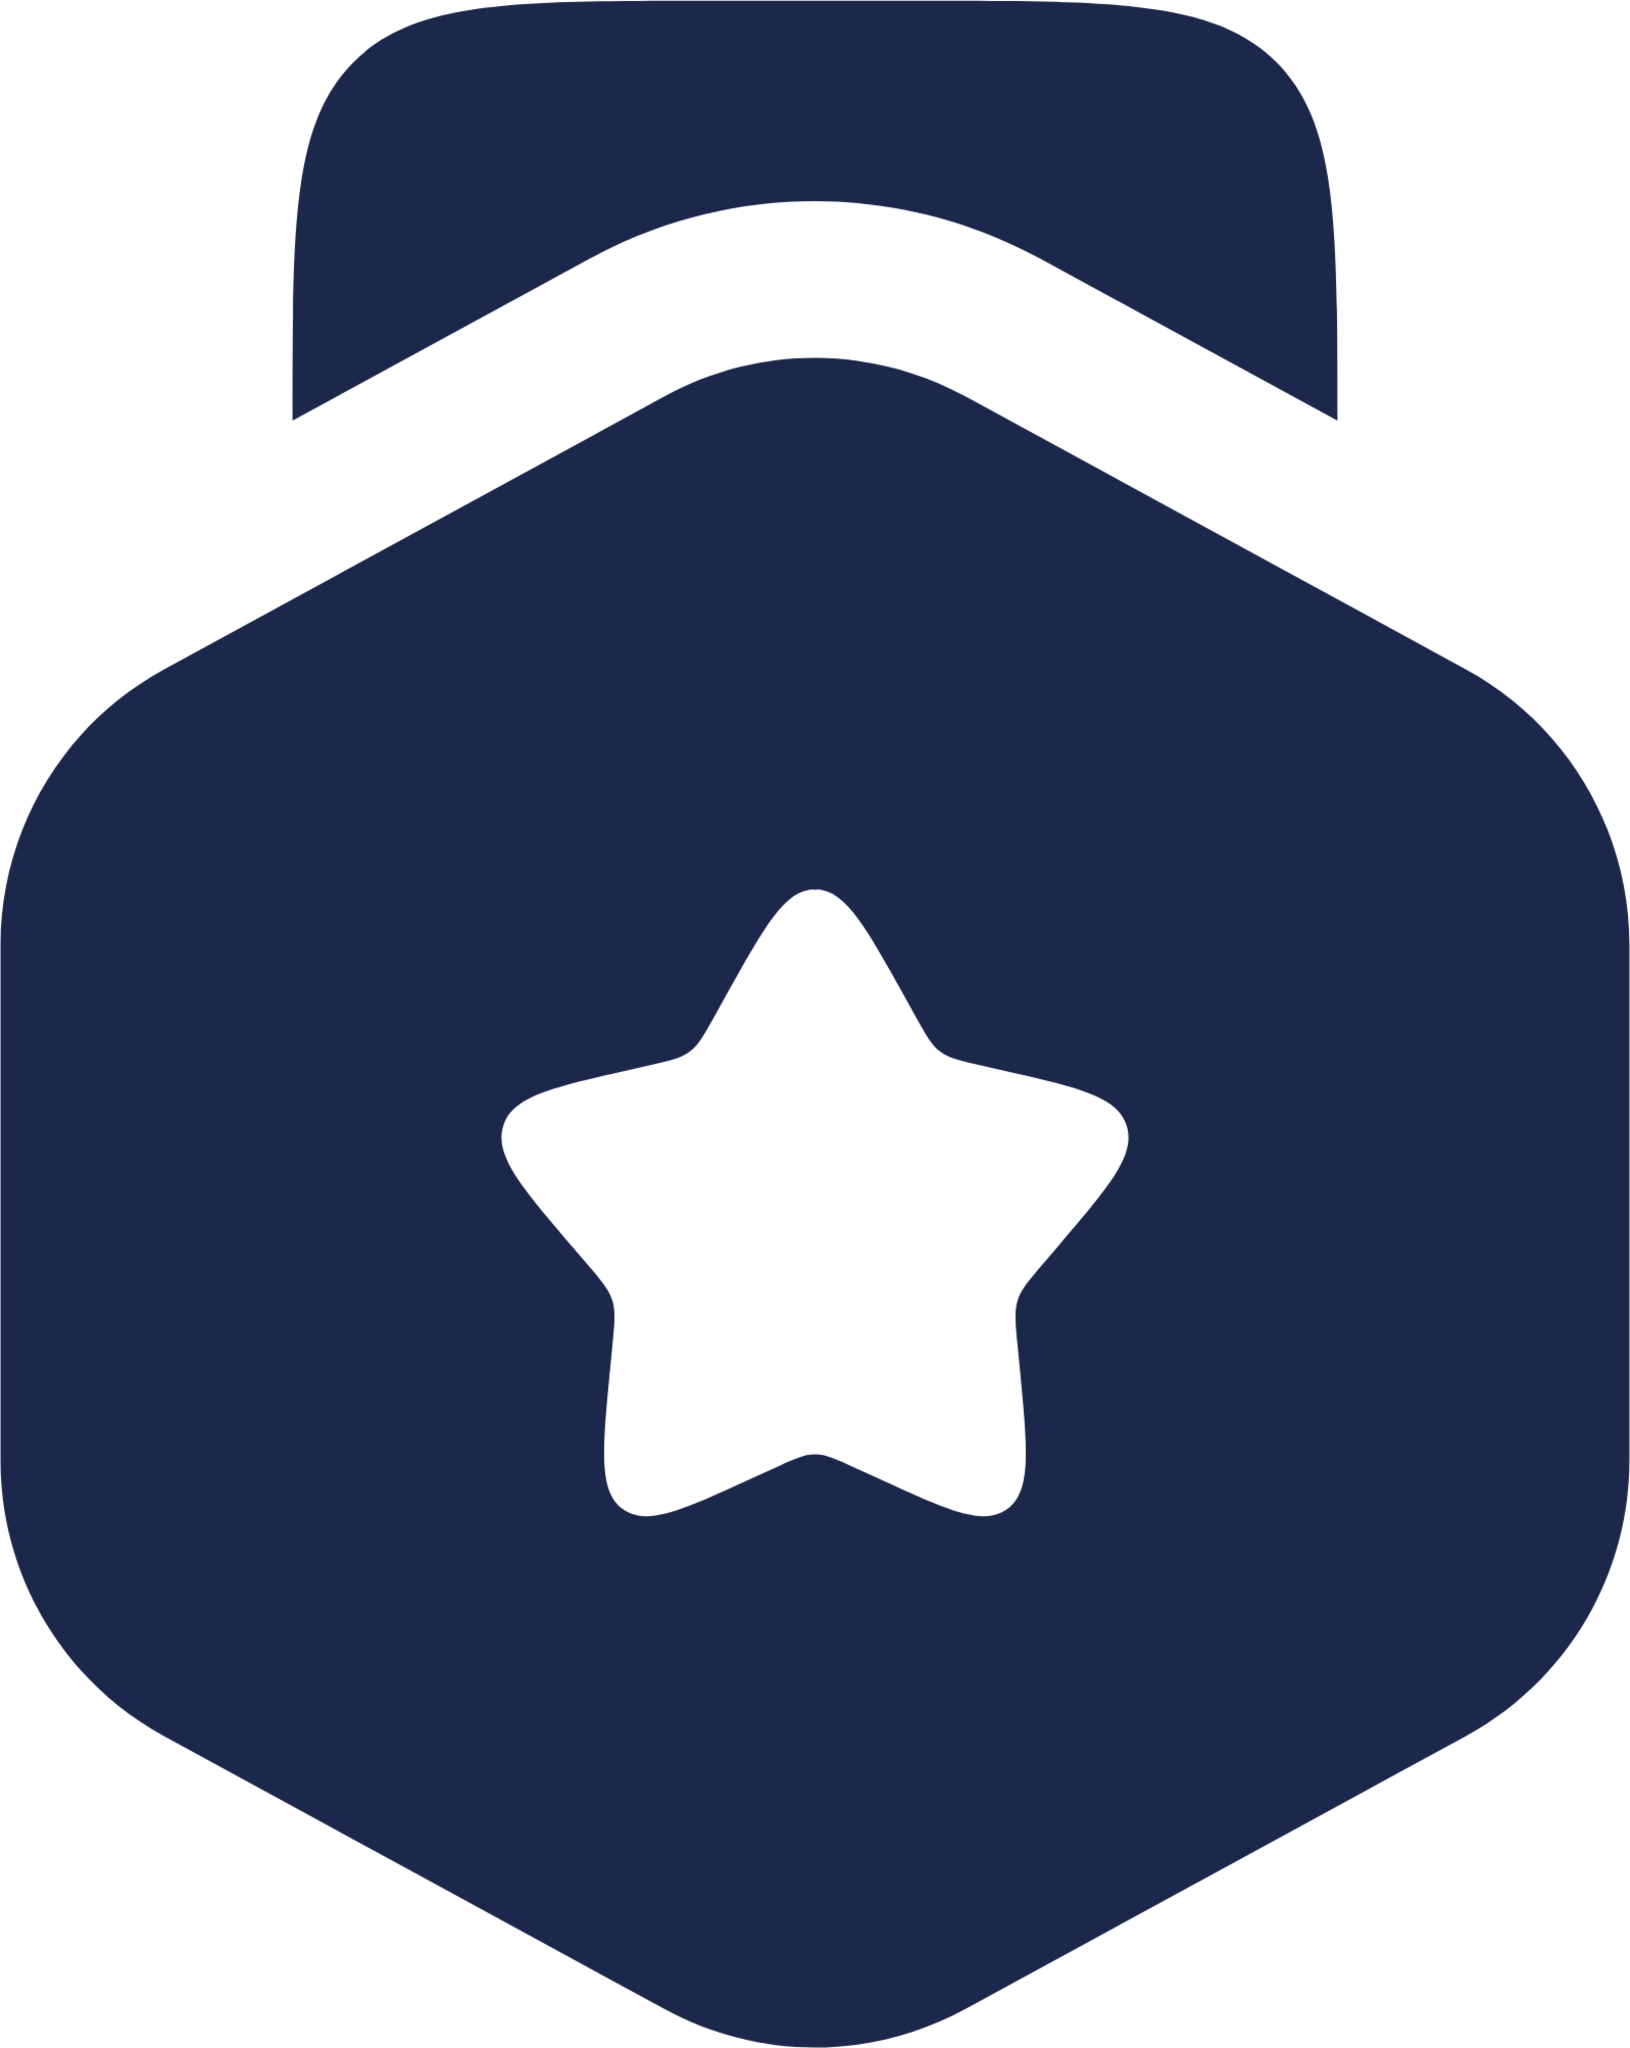 Medal Star icon